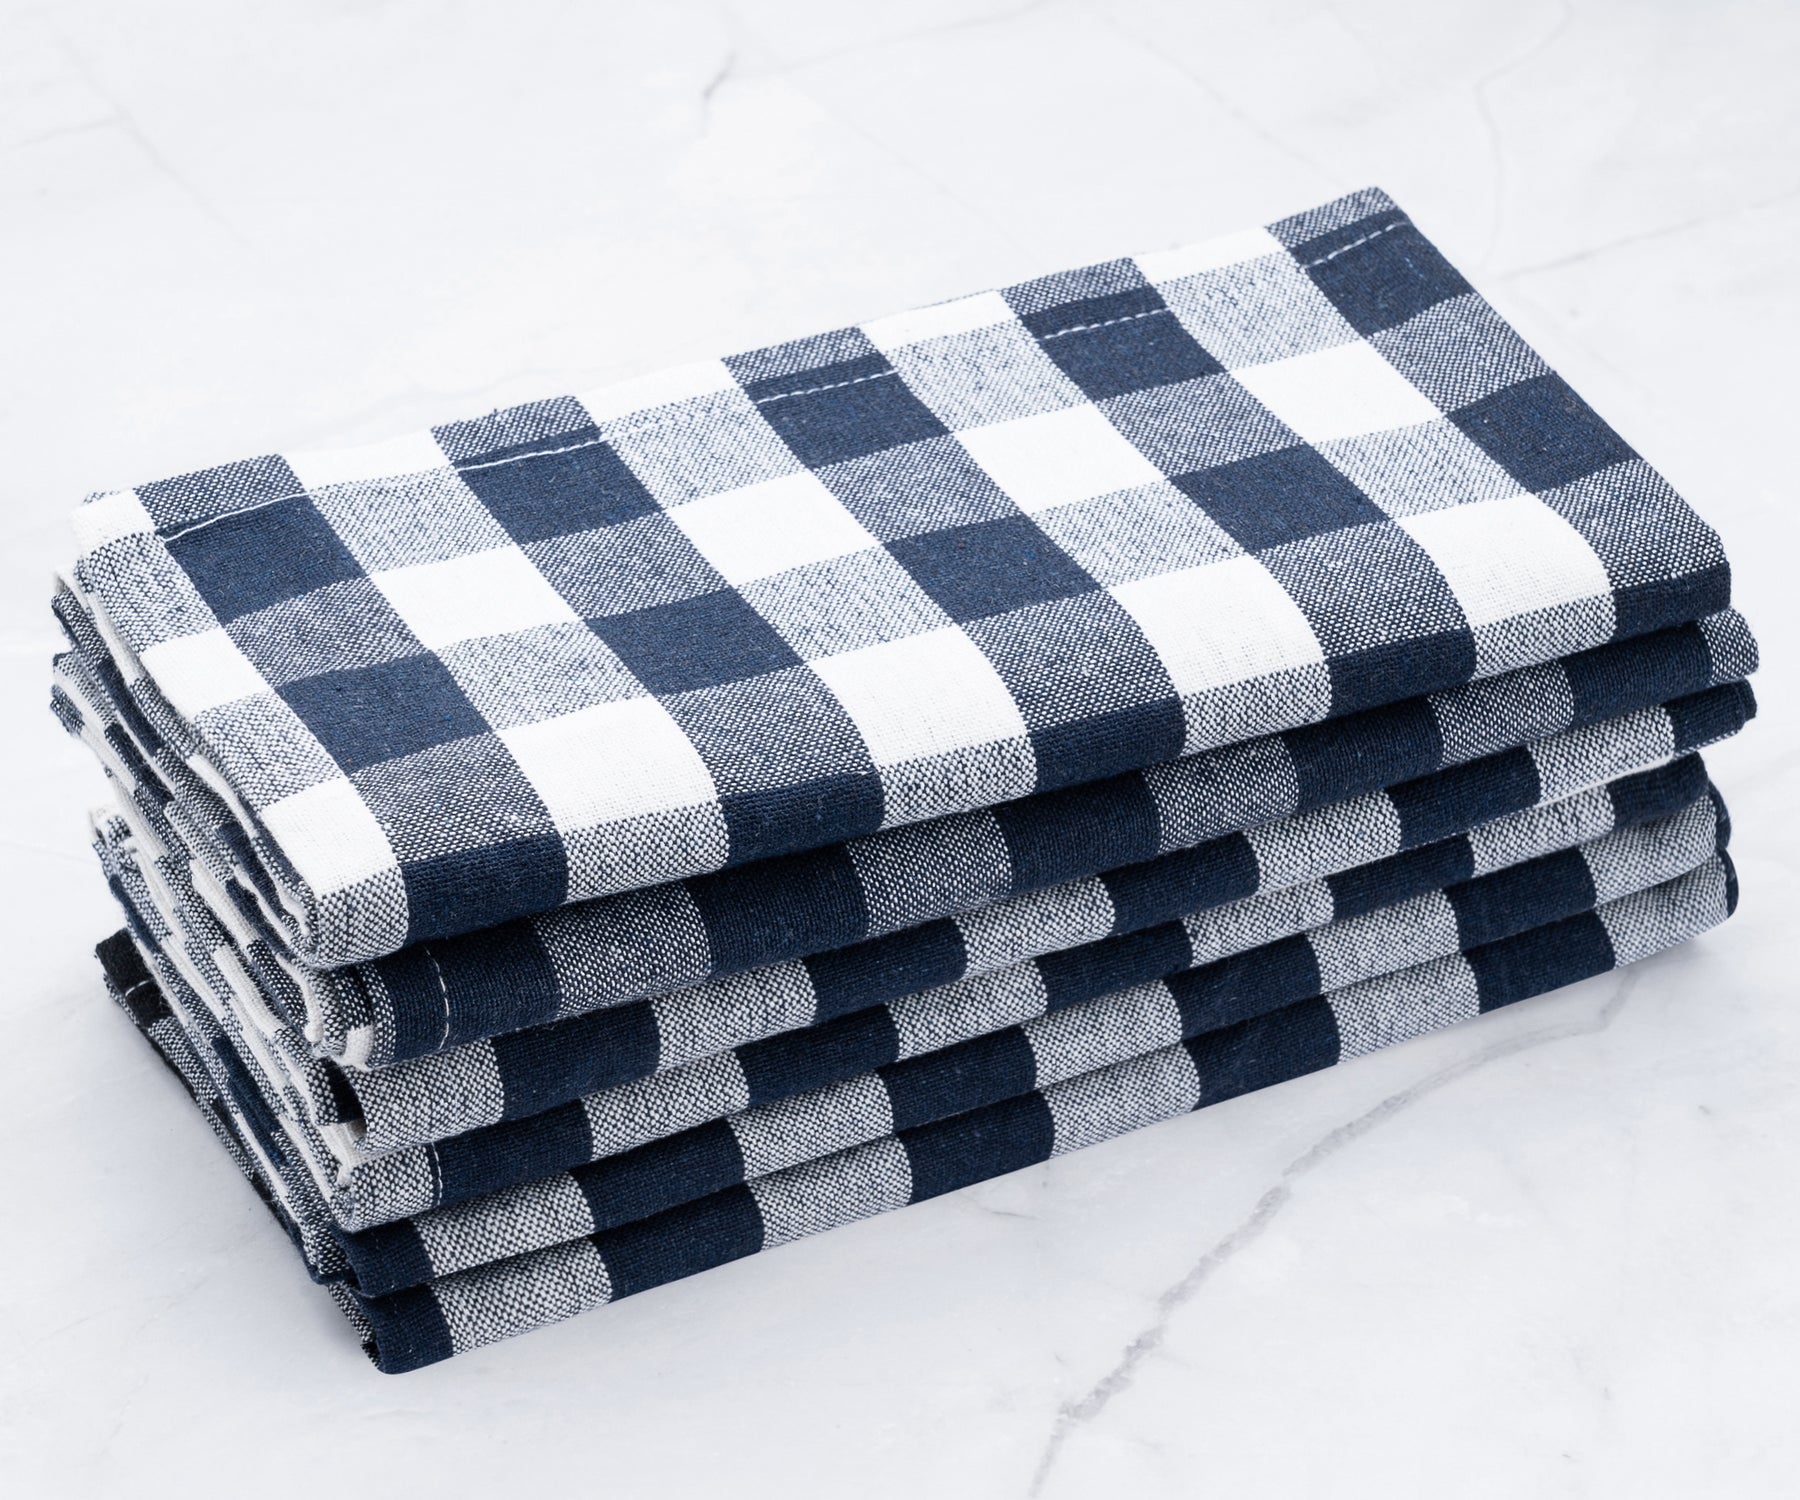 Folded cloth napkin, a finishing touch that makes your table setting complete.